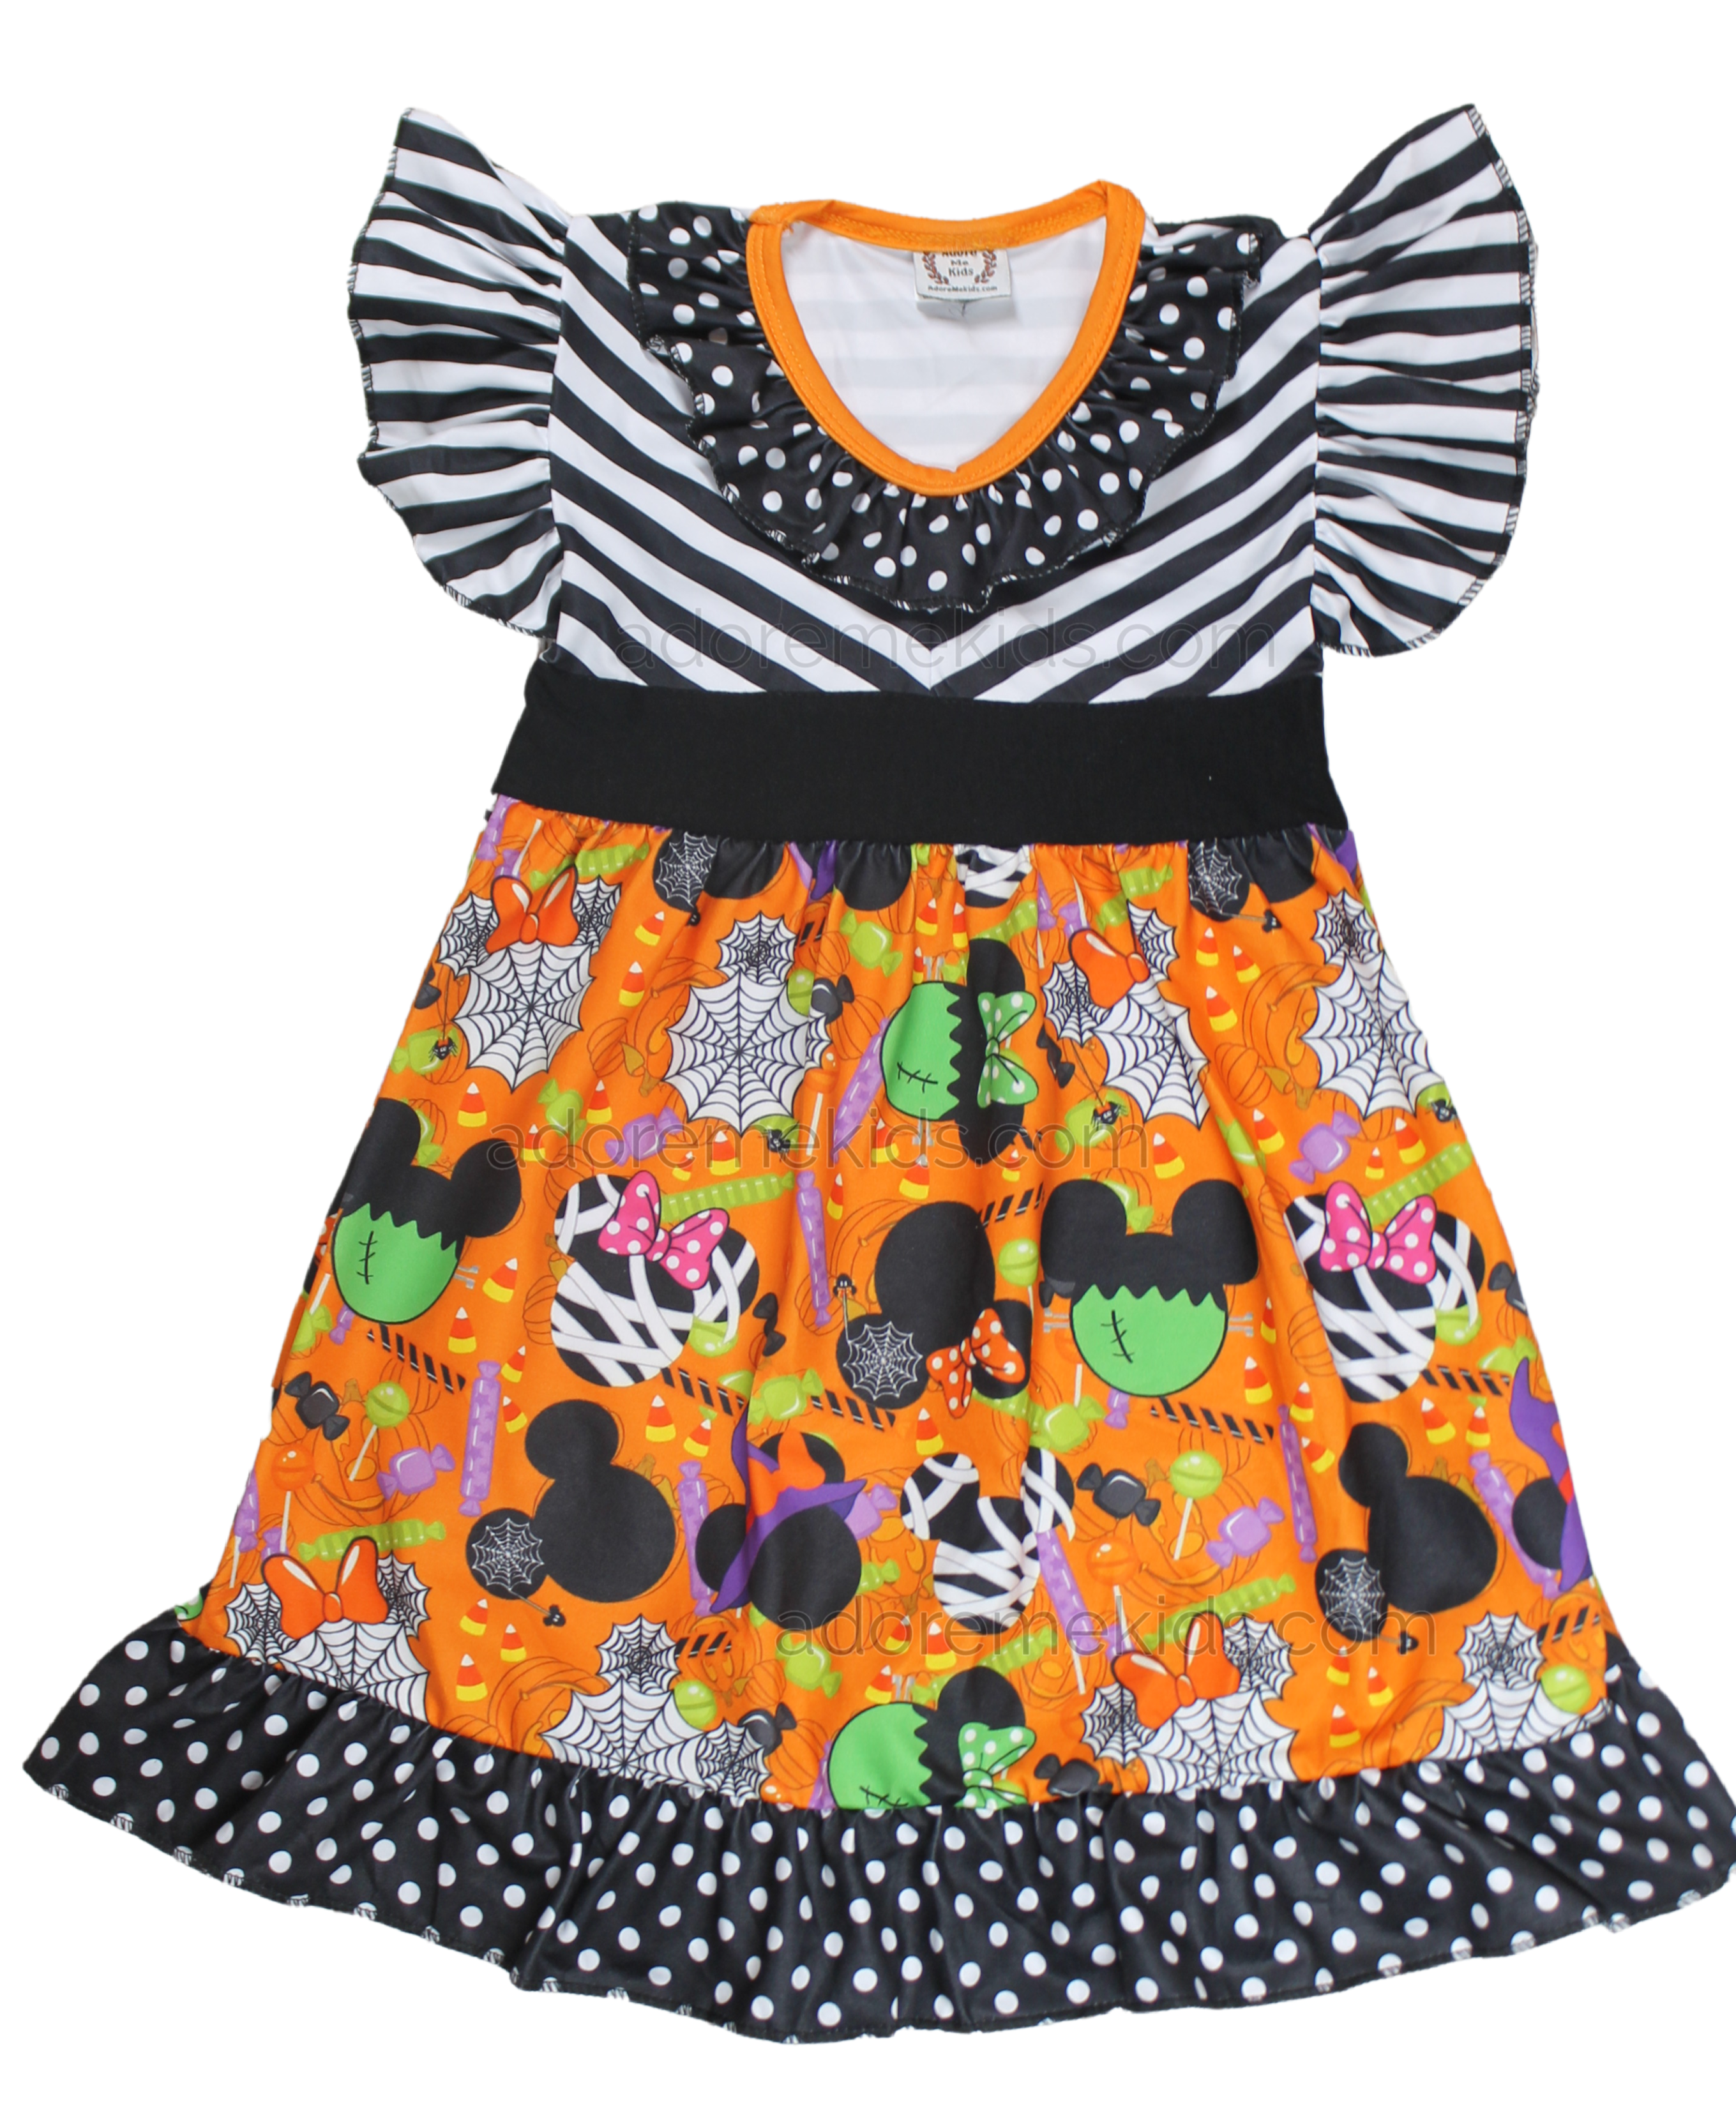 disney boutique outfits for toddlers